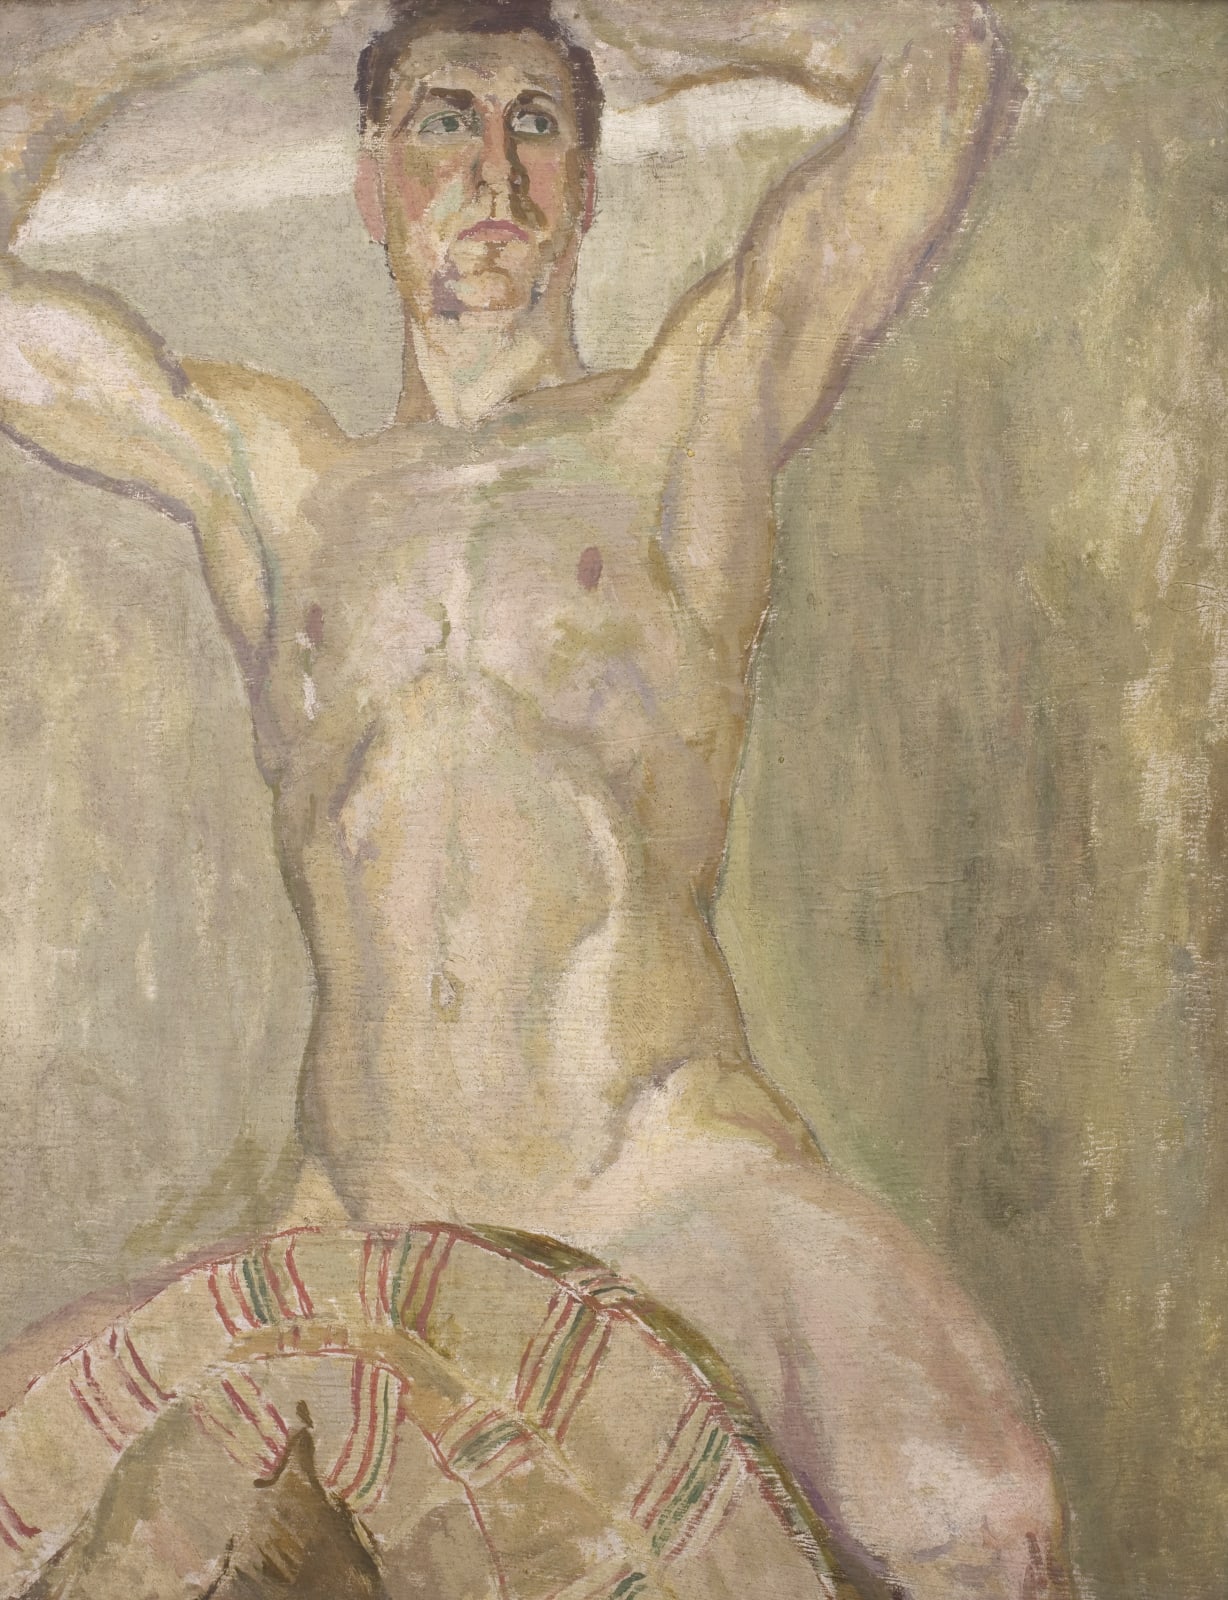 Duncan Grant, Seated Male Nude, 1912, c.